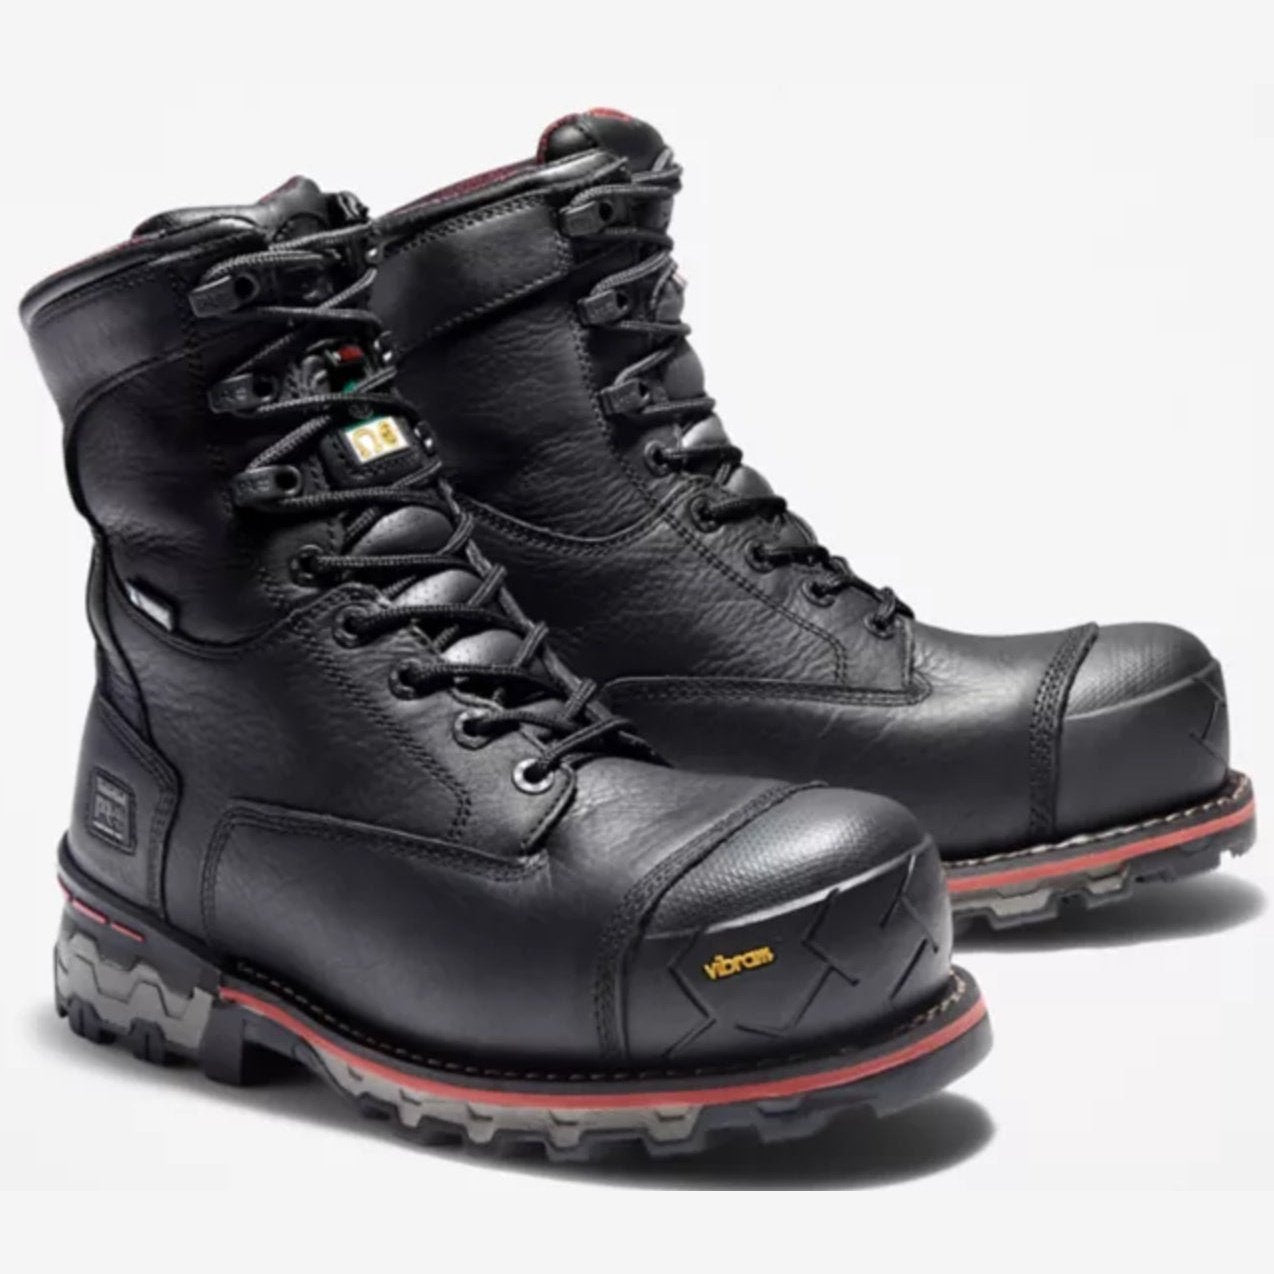 Timberland Pro Men’s Work Boots 8” Boondock Comp Toe Insulated TB0A131D001 - Timberland PRO